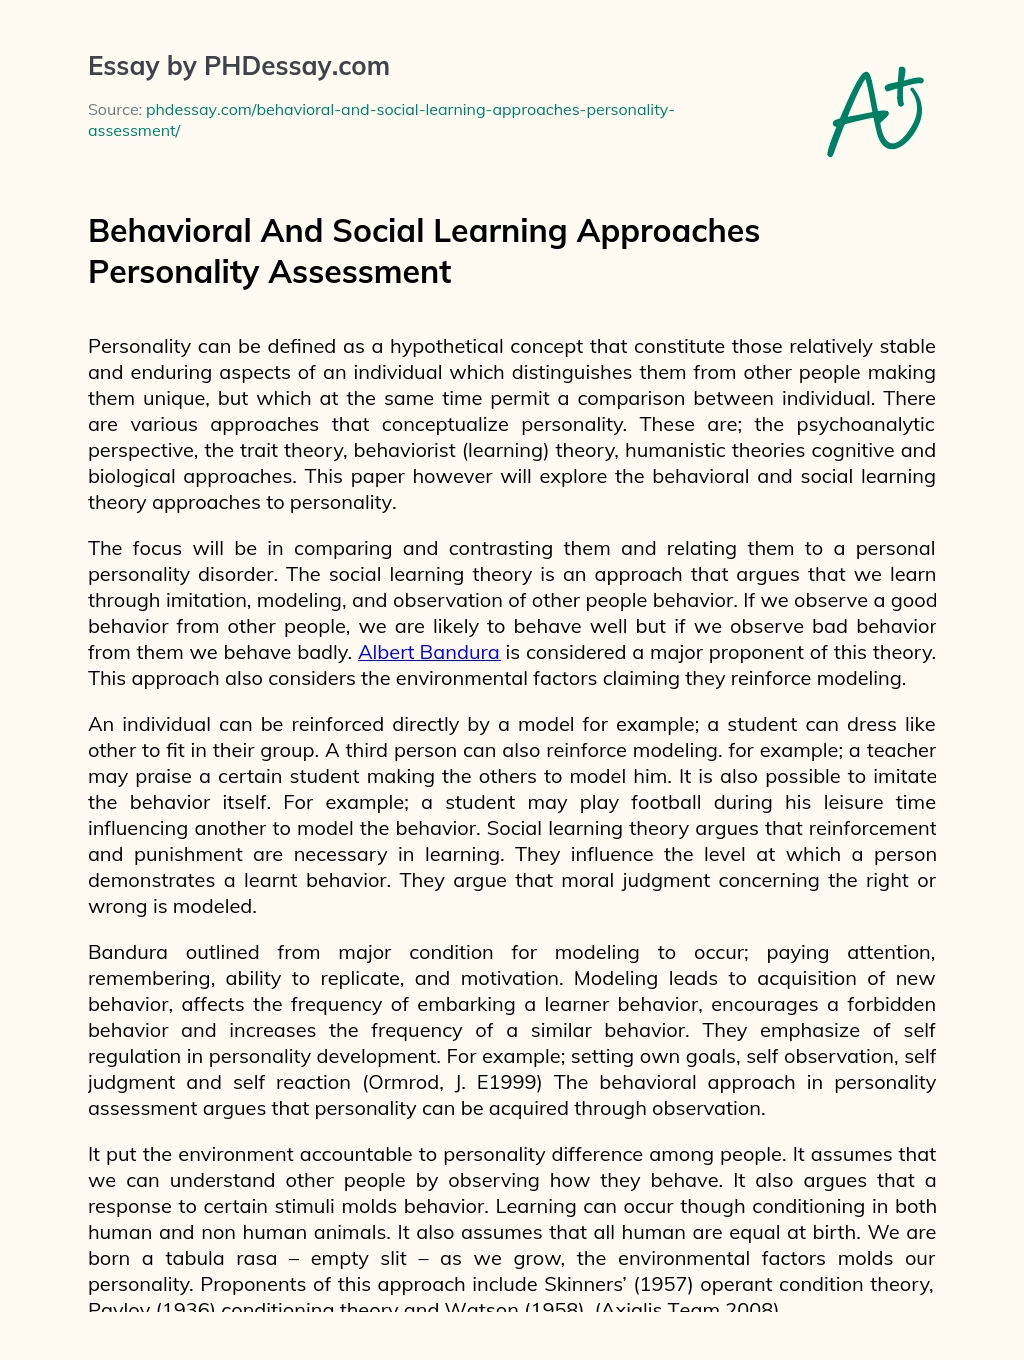 Behavioral And Social Learning Approaches Personality Assessment essay